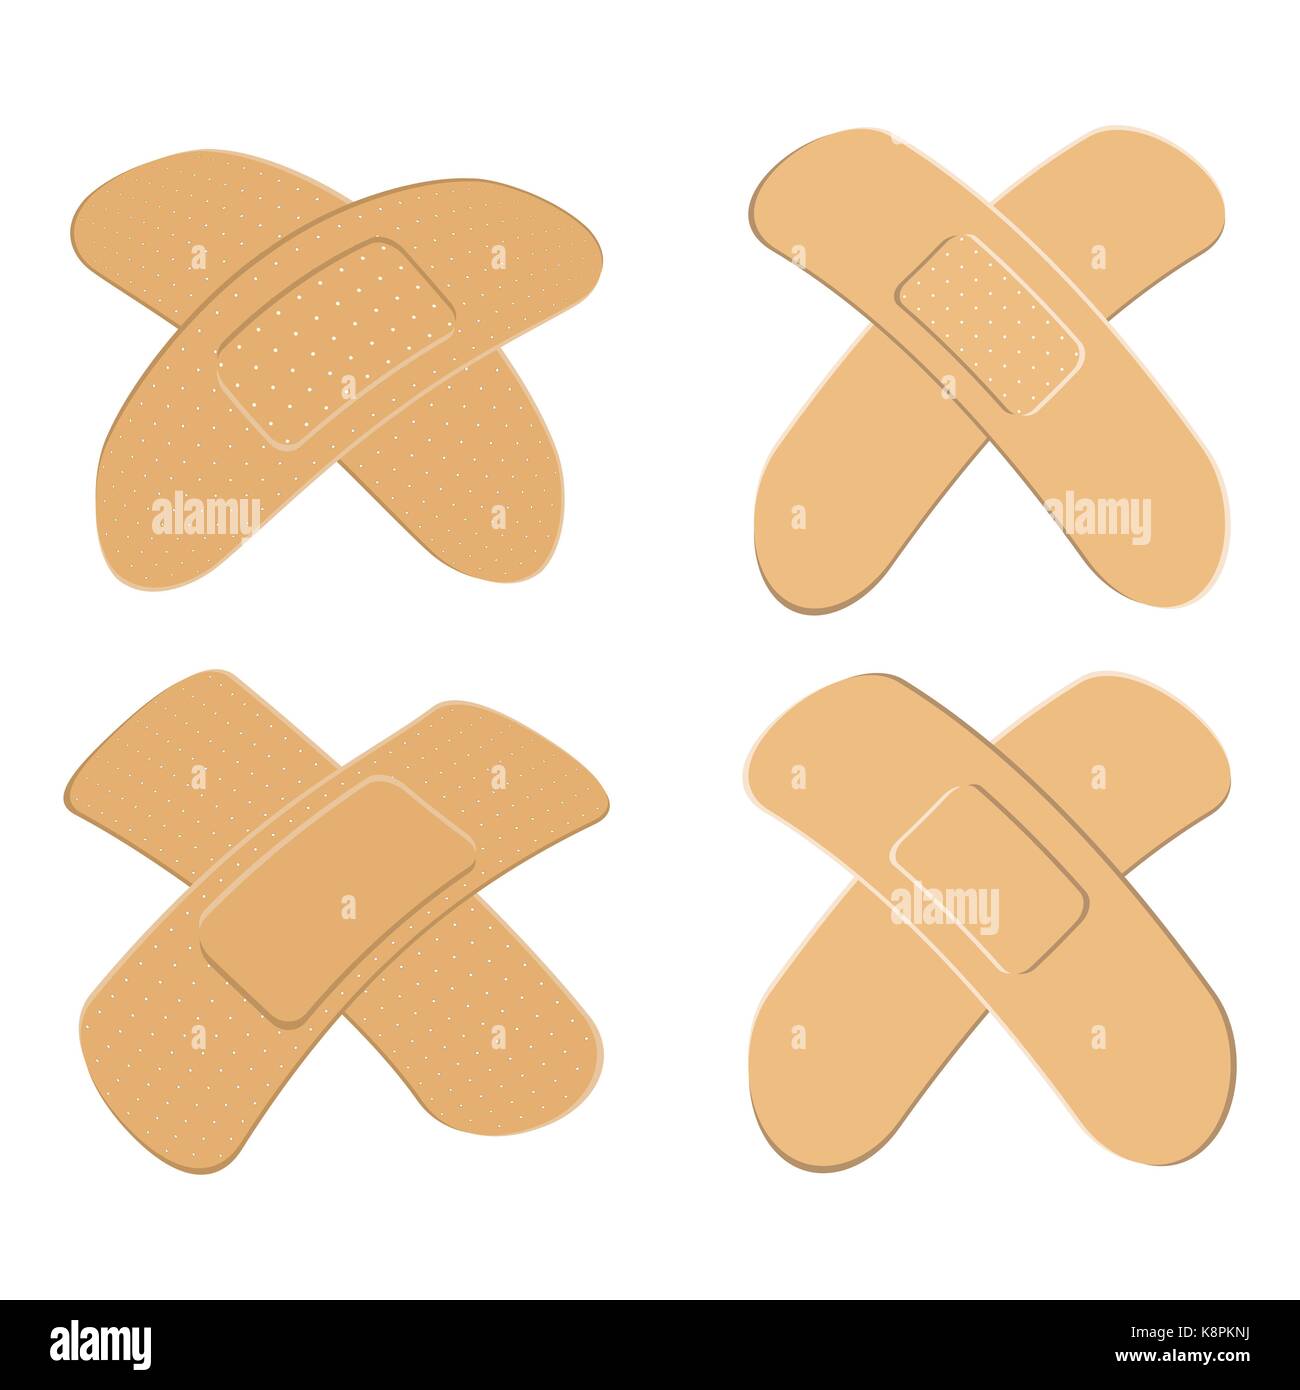 Set of Adhesive, flexible, fabric plaster . Medical bandage in different shape - curved cross. Vector illustration isolated on white background. Stock Vector